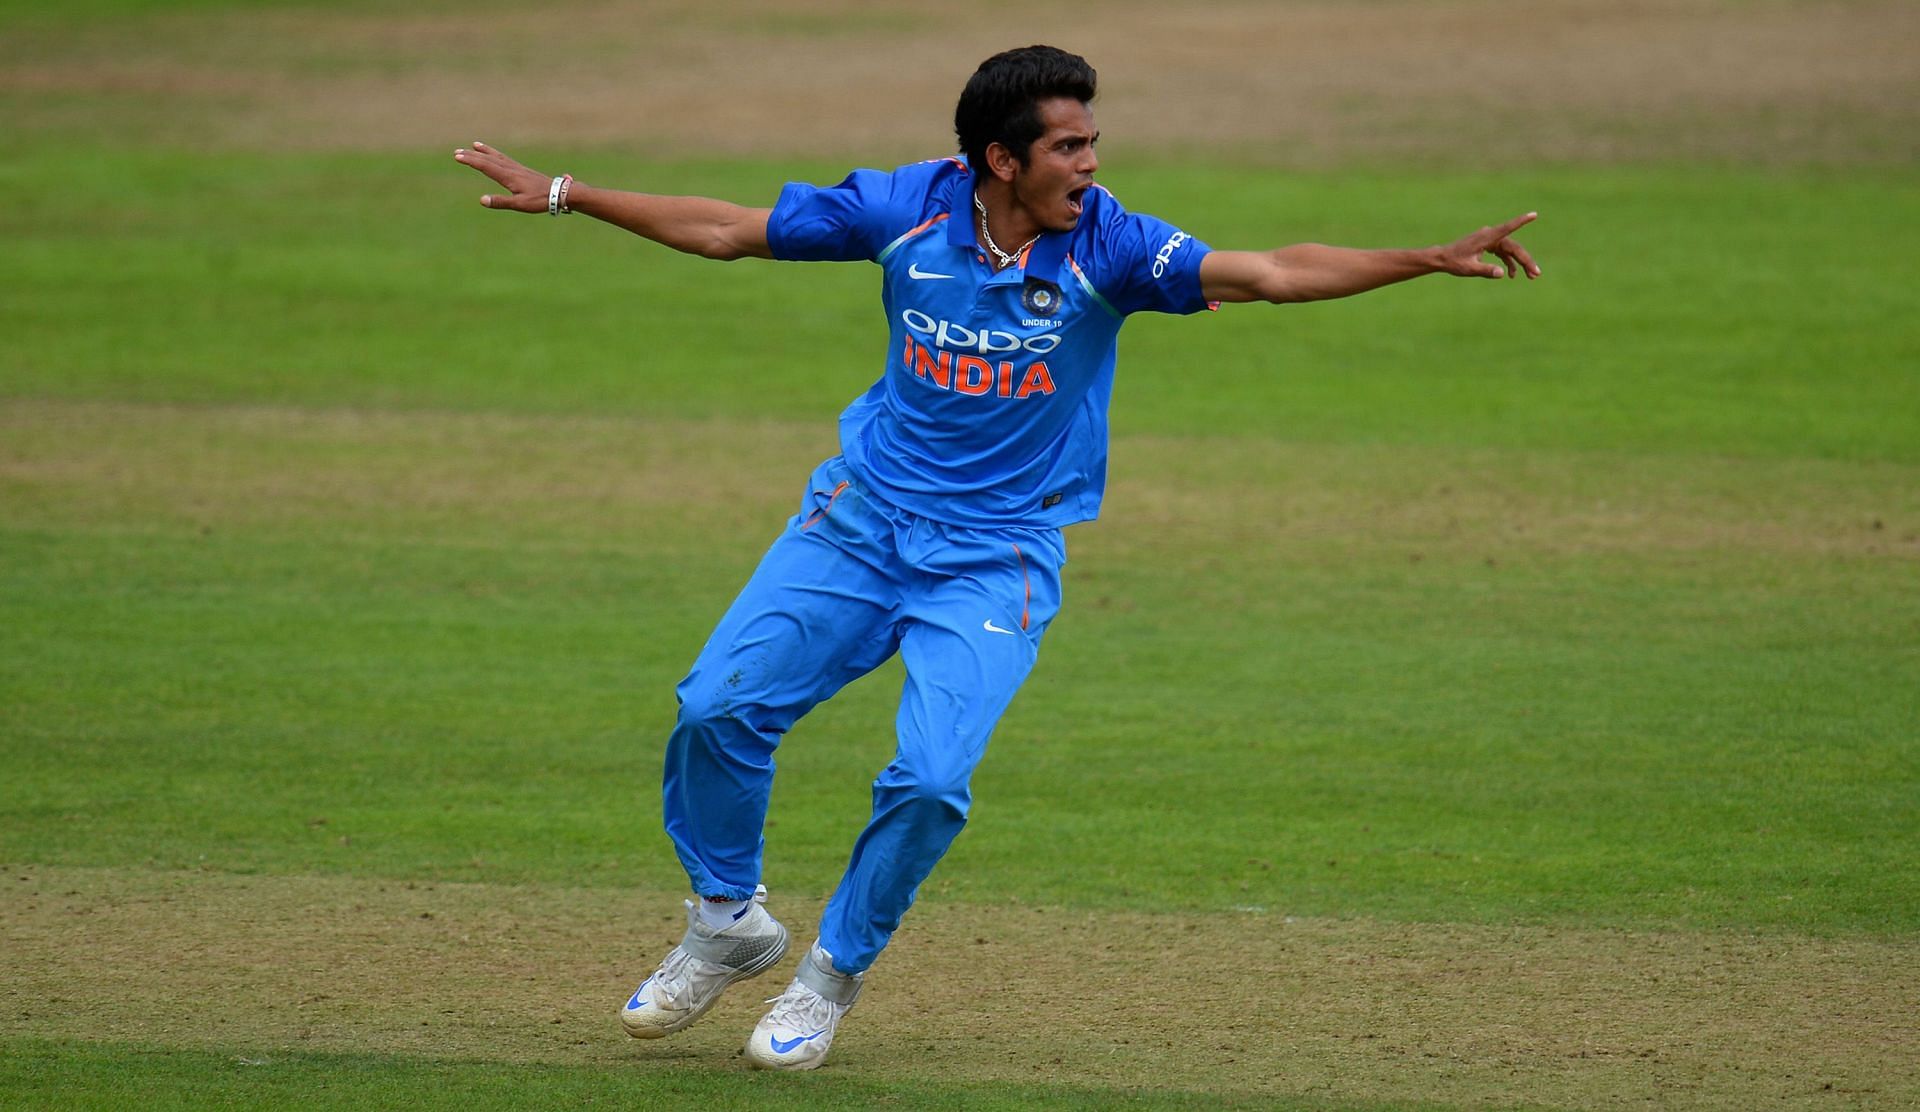 Will this be the year that Kamlesh Nagarkoti breaks out?